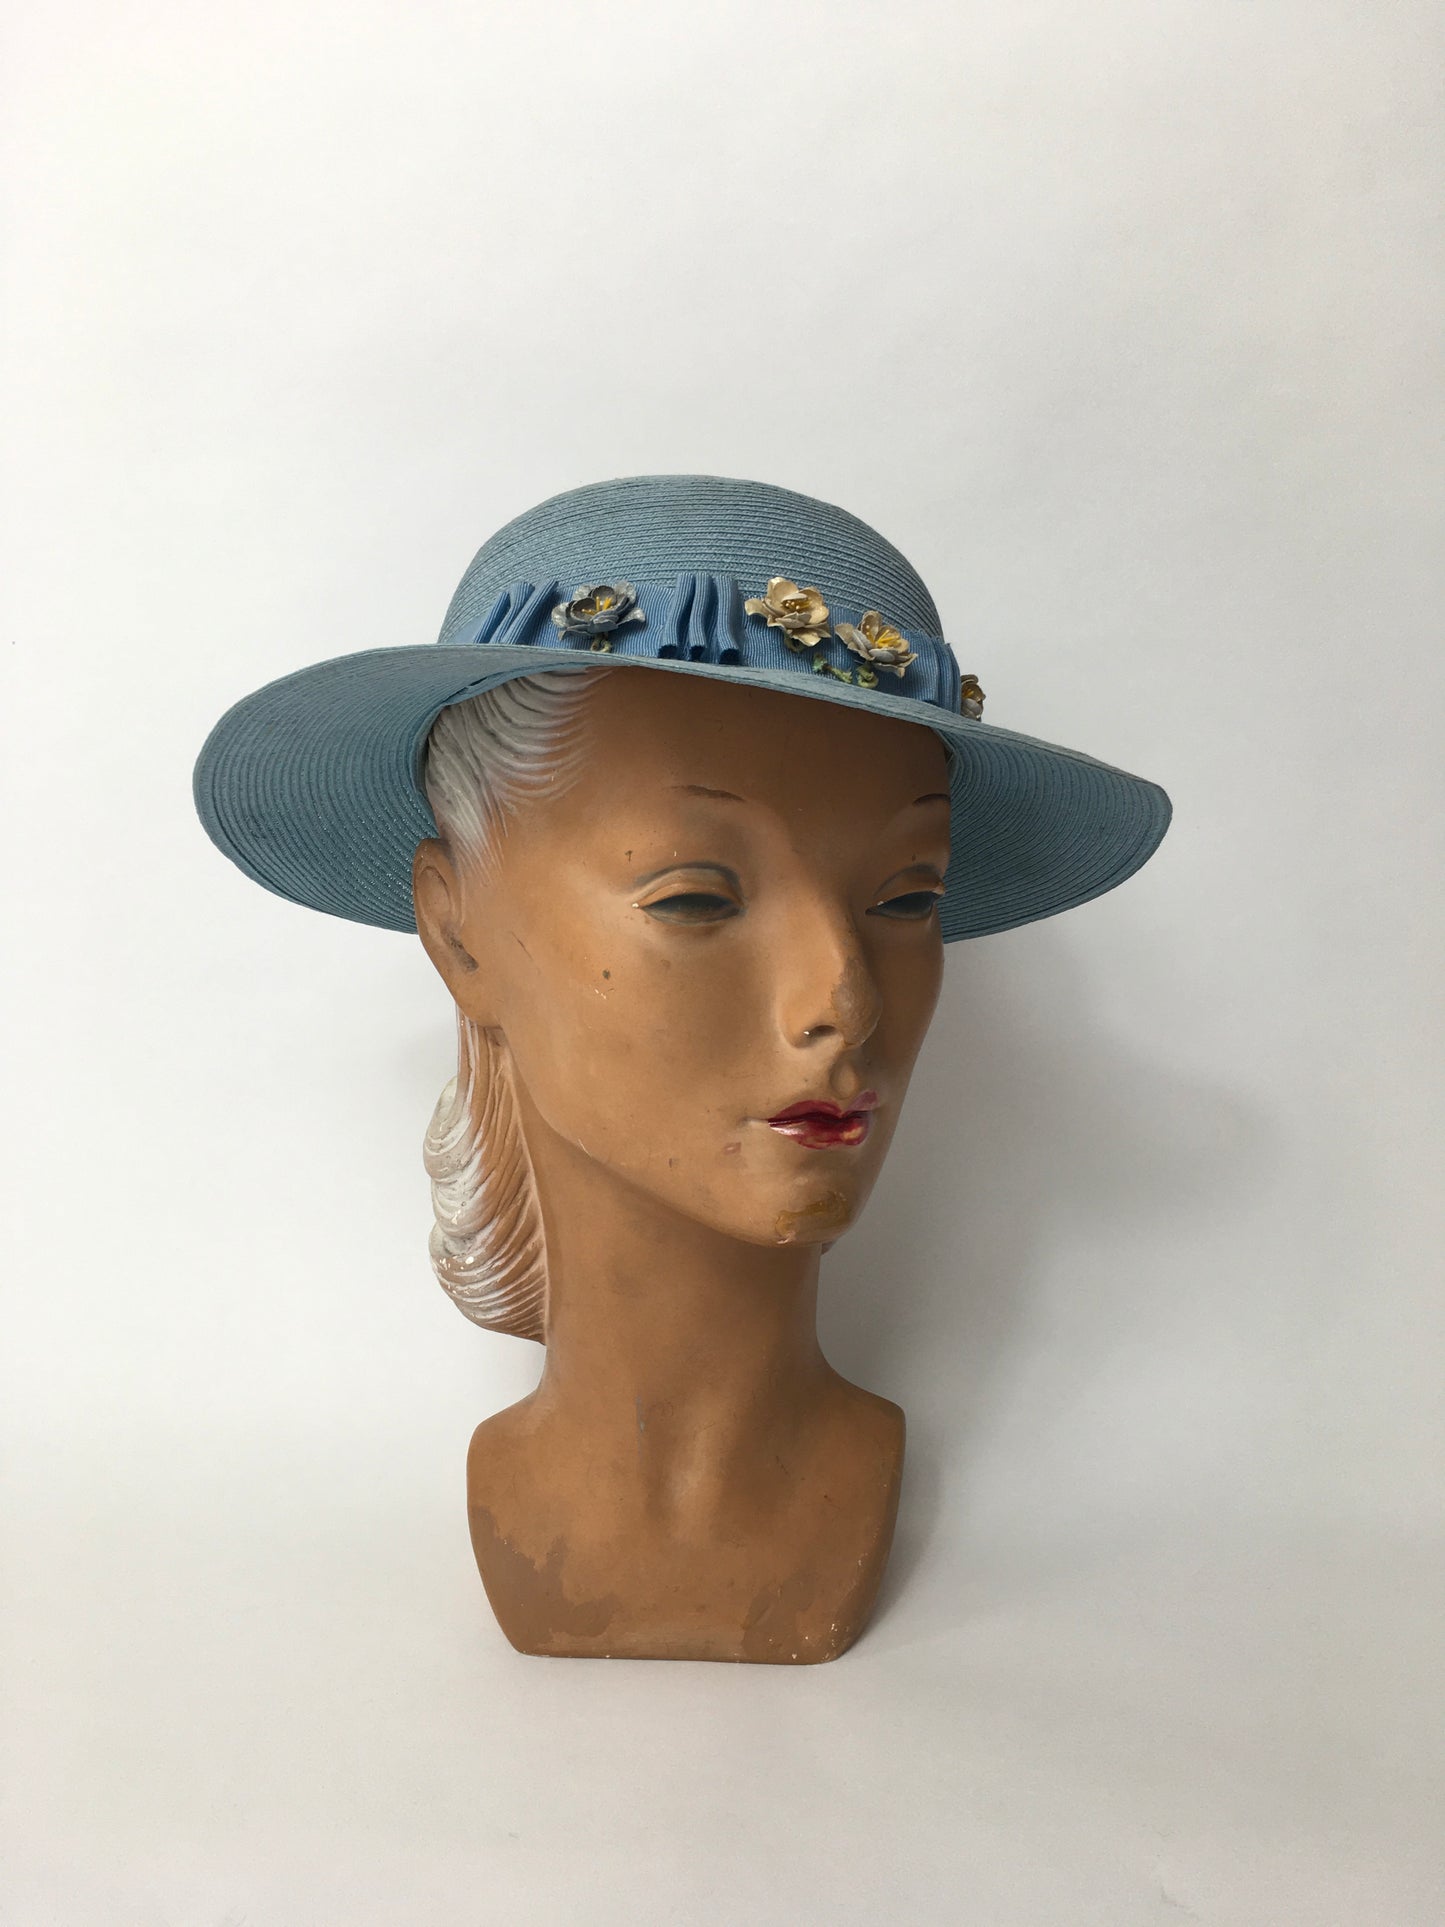 RESERVED FOR B - DO NOT BUY - Original Late 1930’s Cornflower Blue Hat with Original Cream Flowers - Festival of Vintage Fashion Show Exclusive